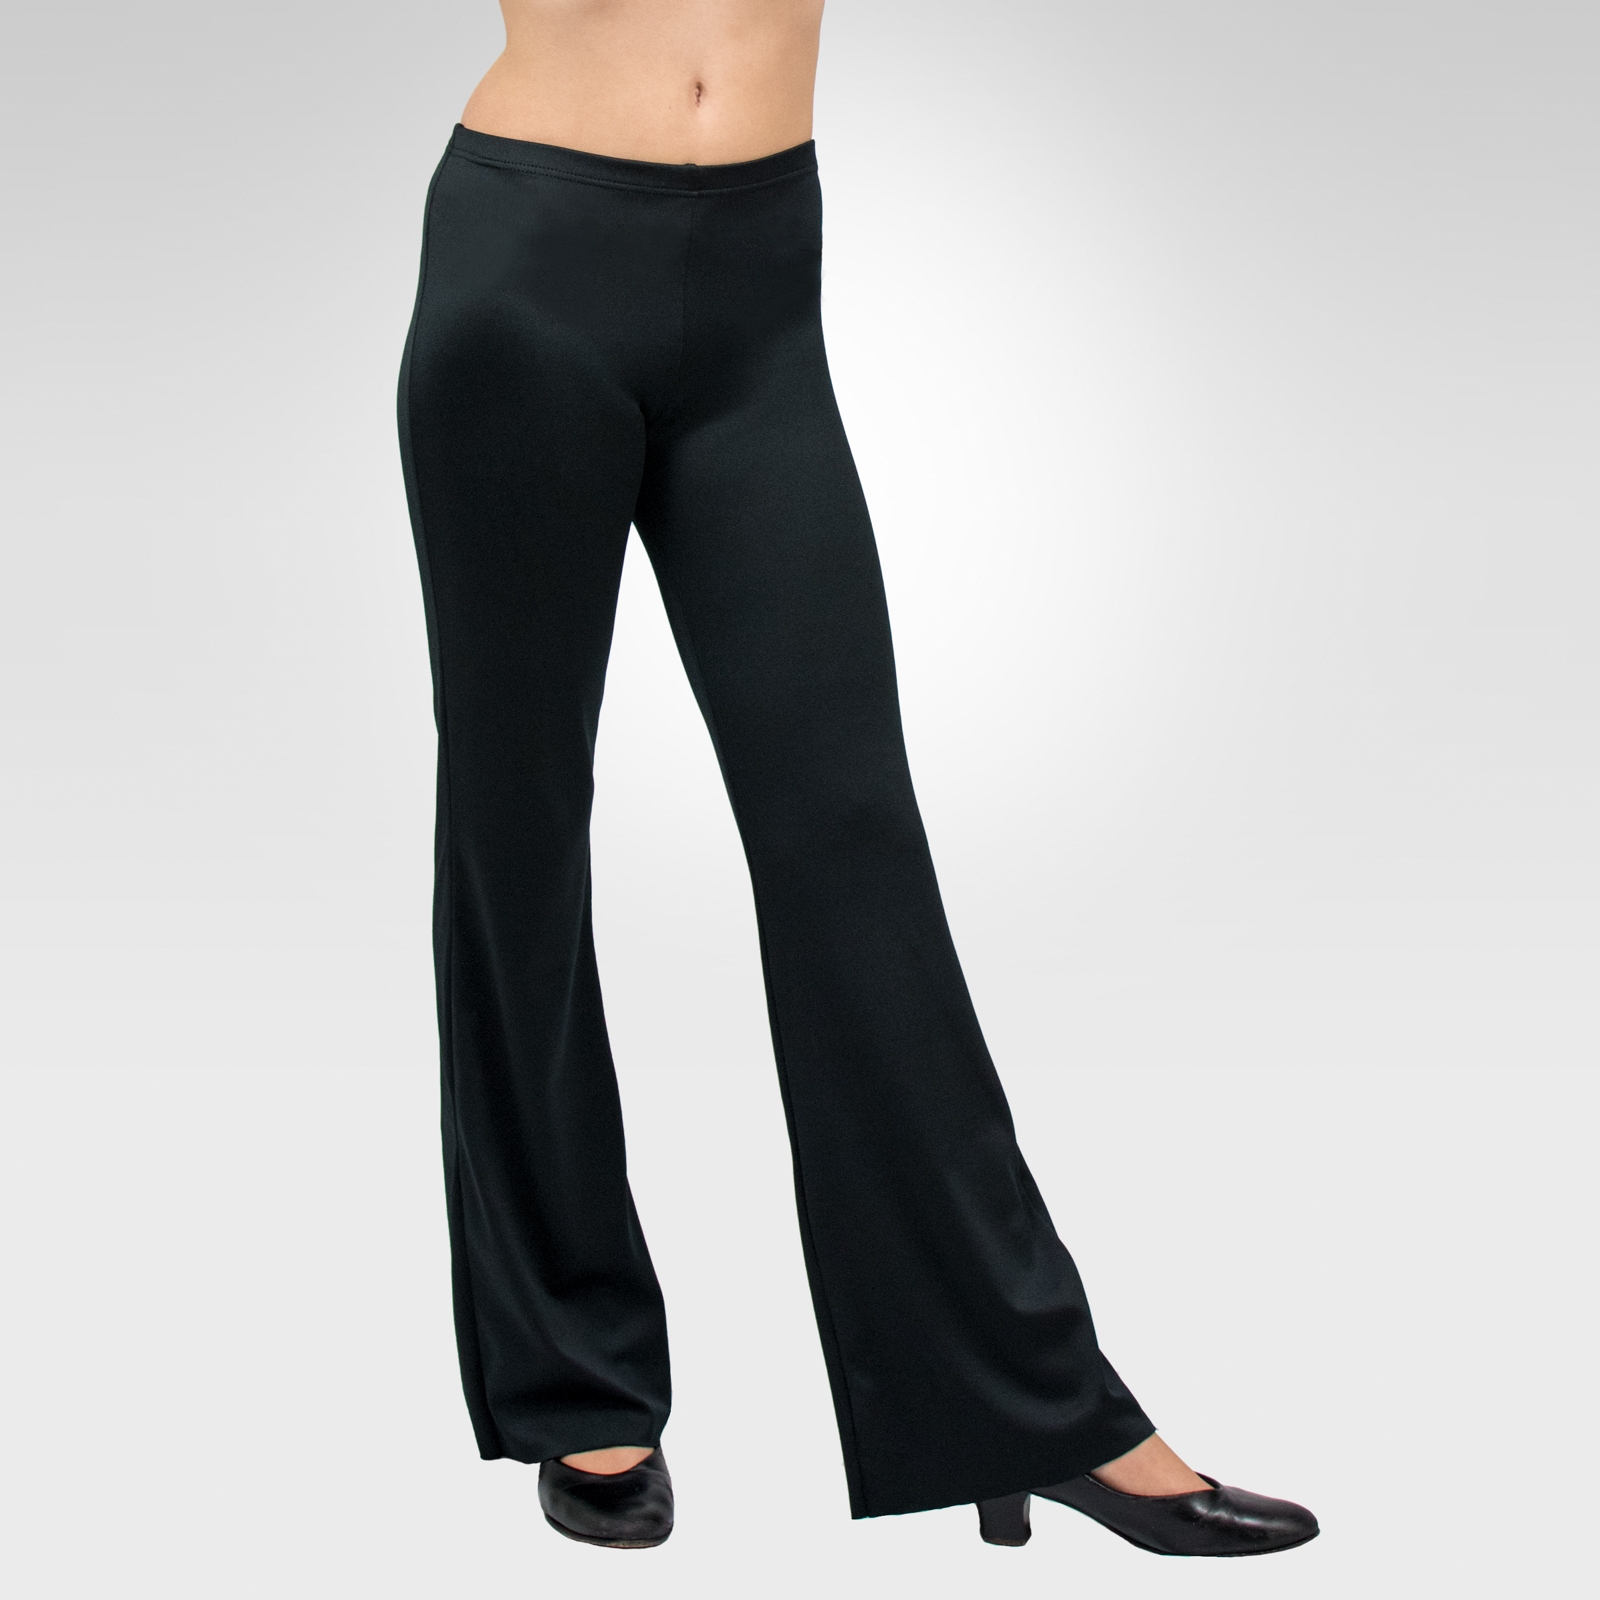 Spandex low-rise boot-cut pants - Performing Outfit Design Studio Store